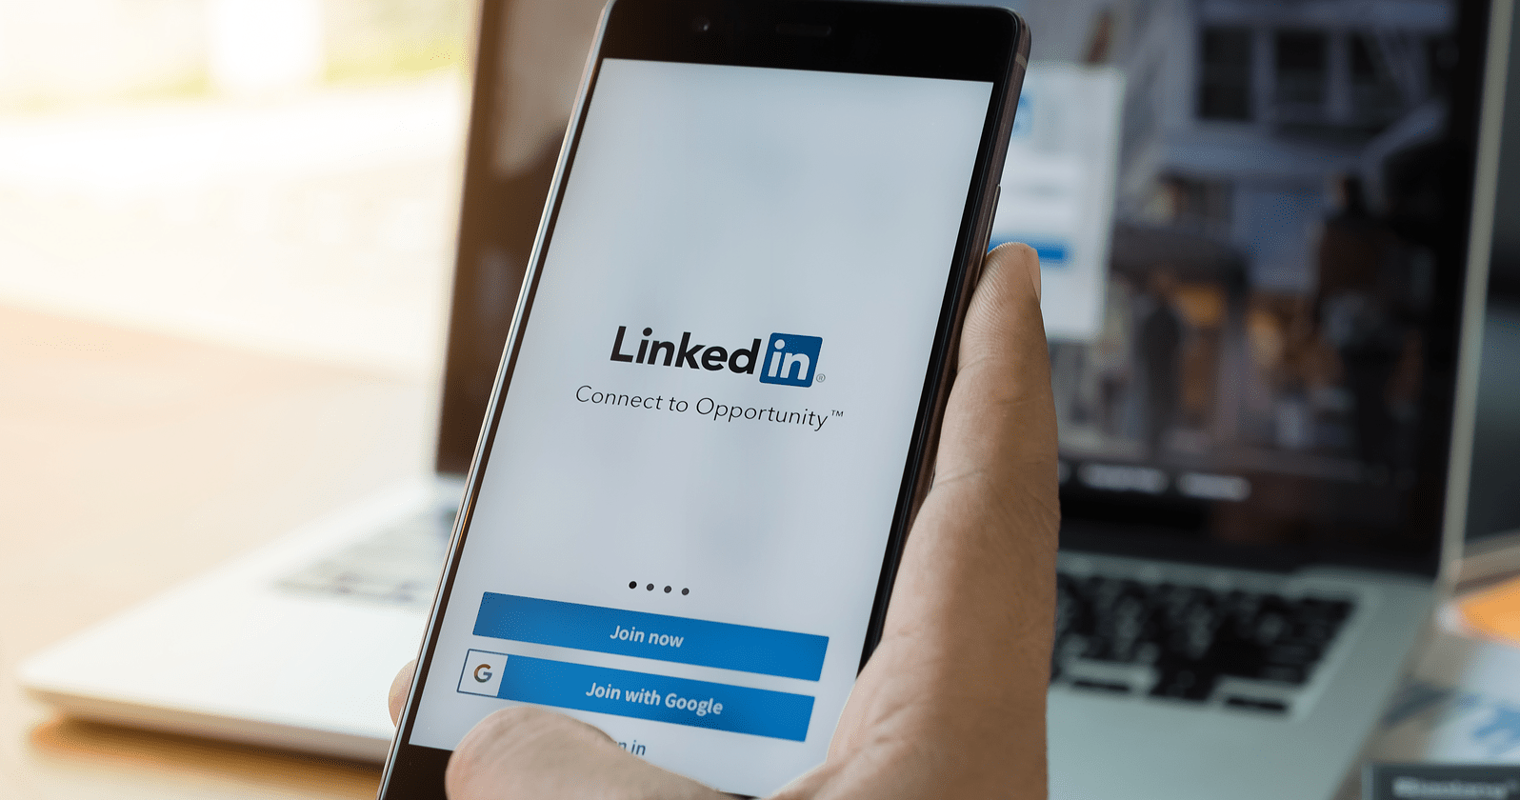 LinkedIn to Integrate Groups into the Mobile App